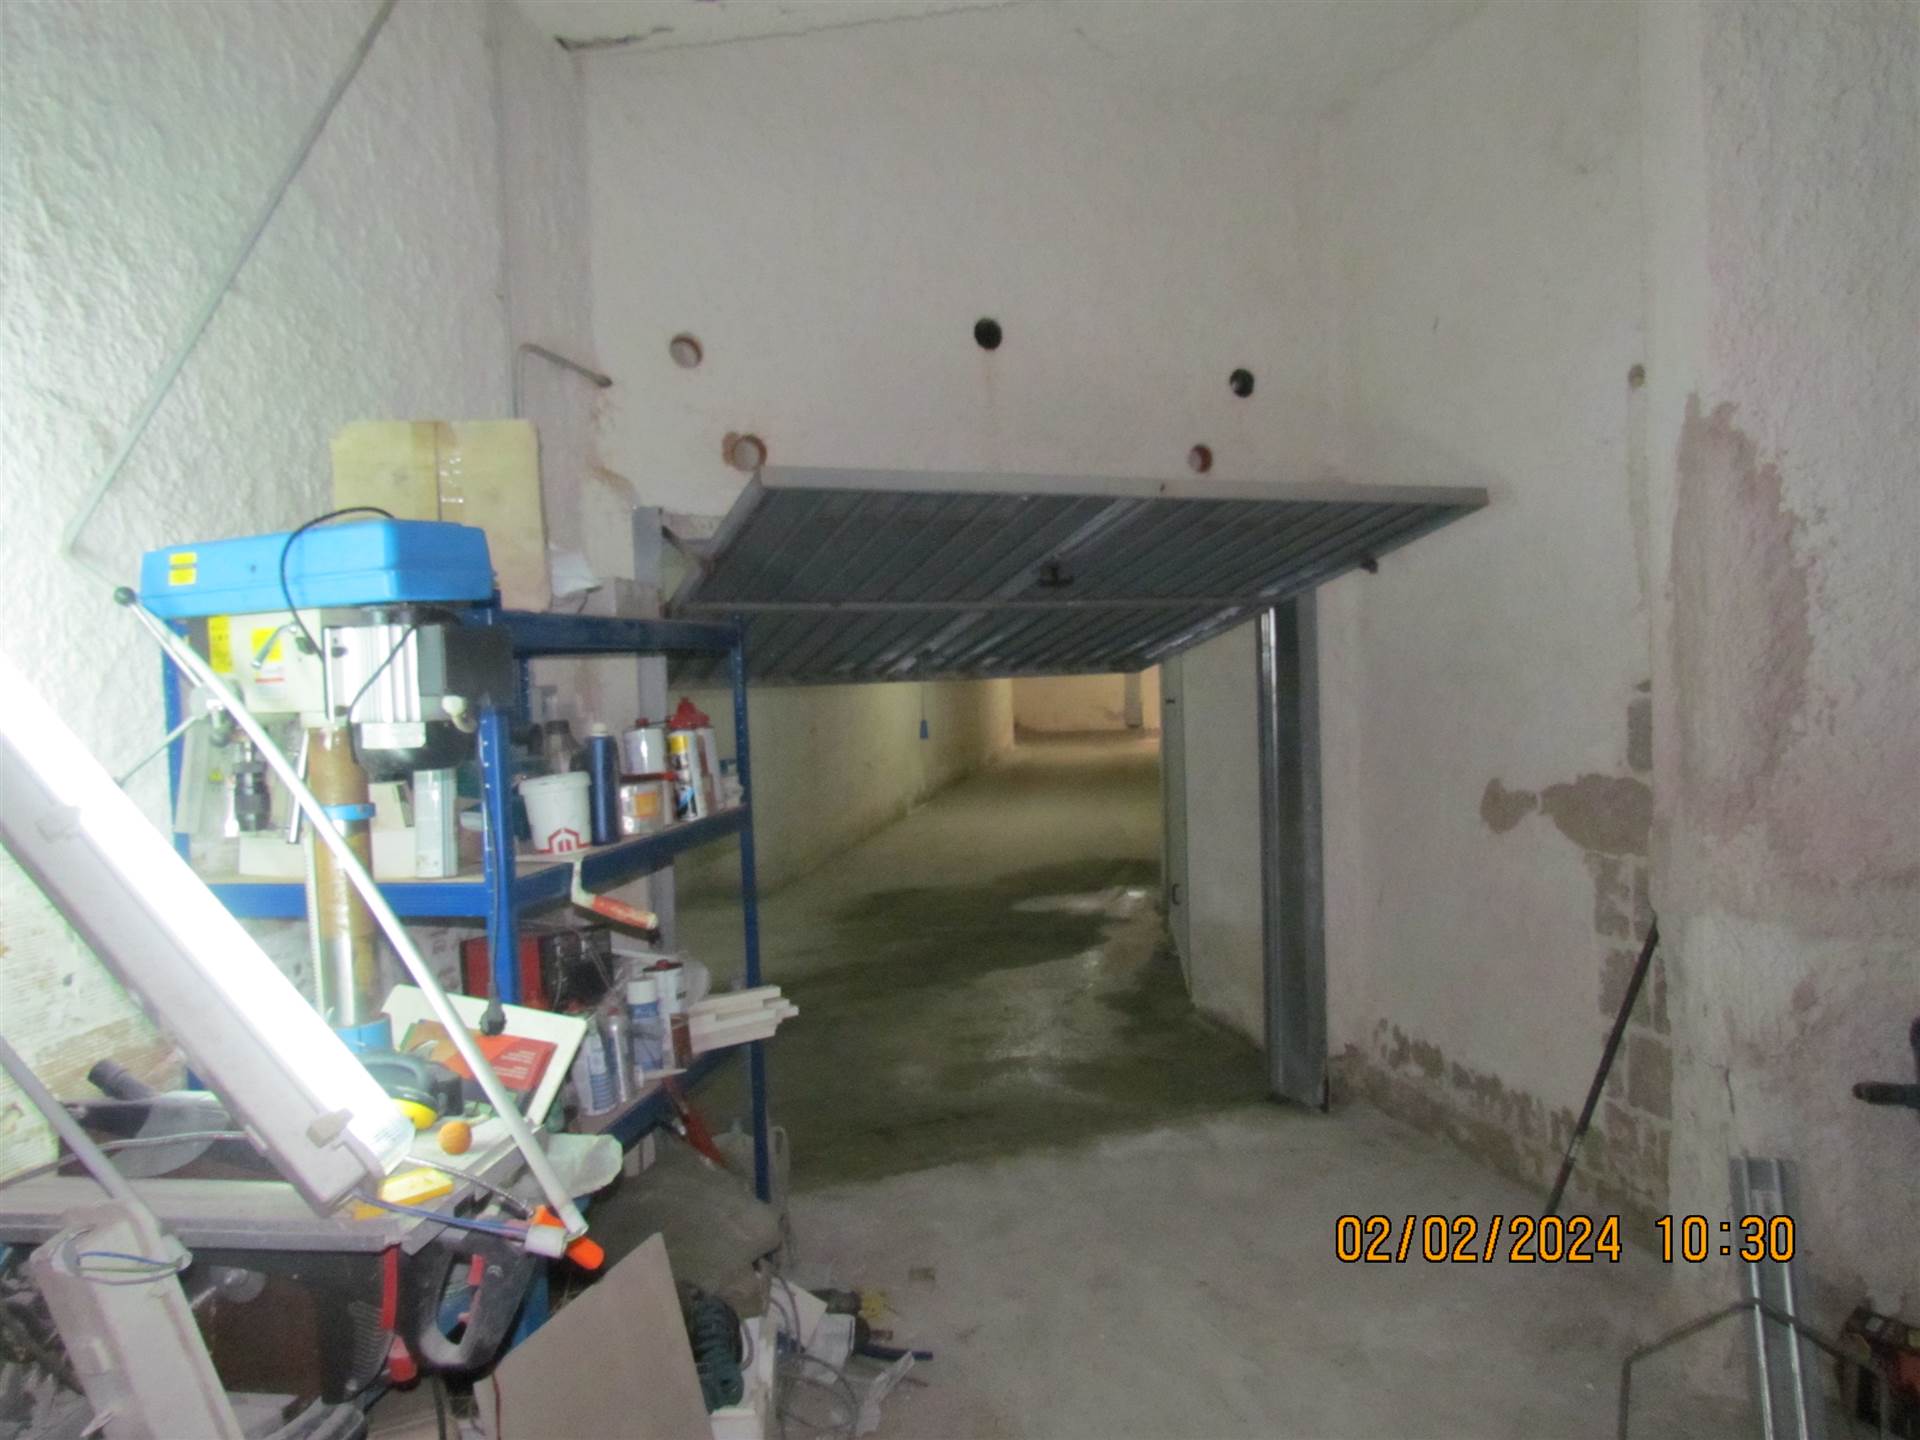 We have a garage of 37 square meters, located in the basement and consisting of a room. Fair condition.